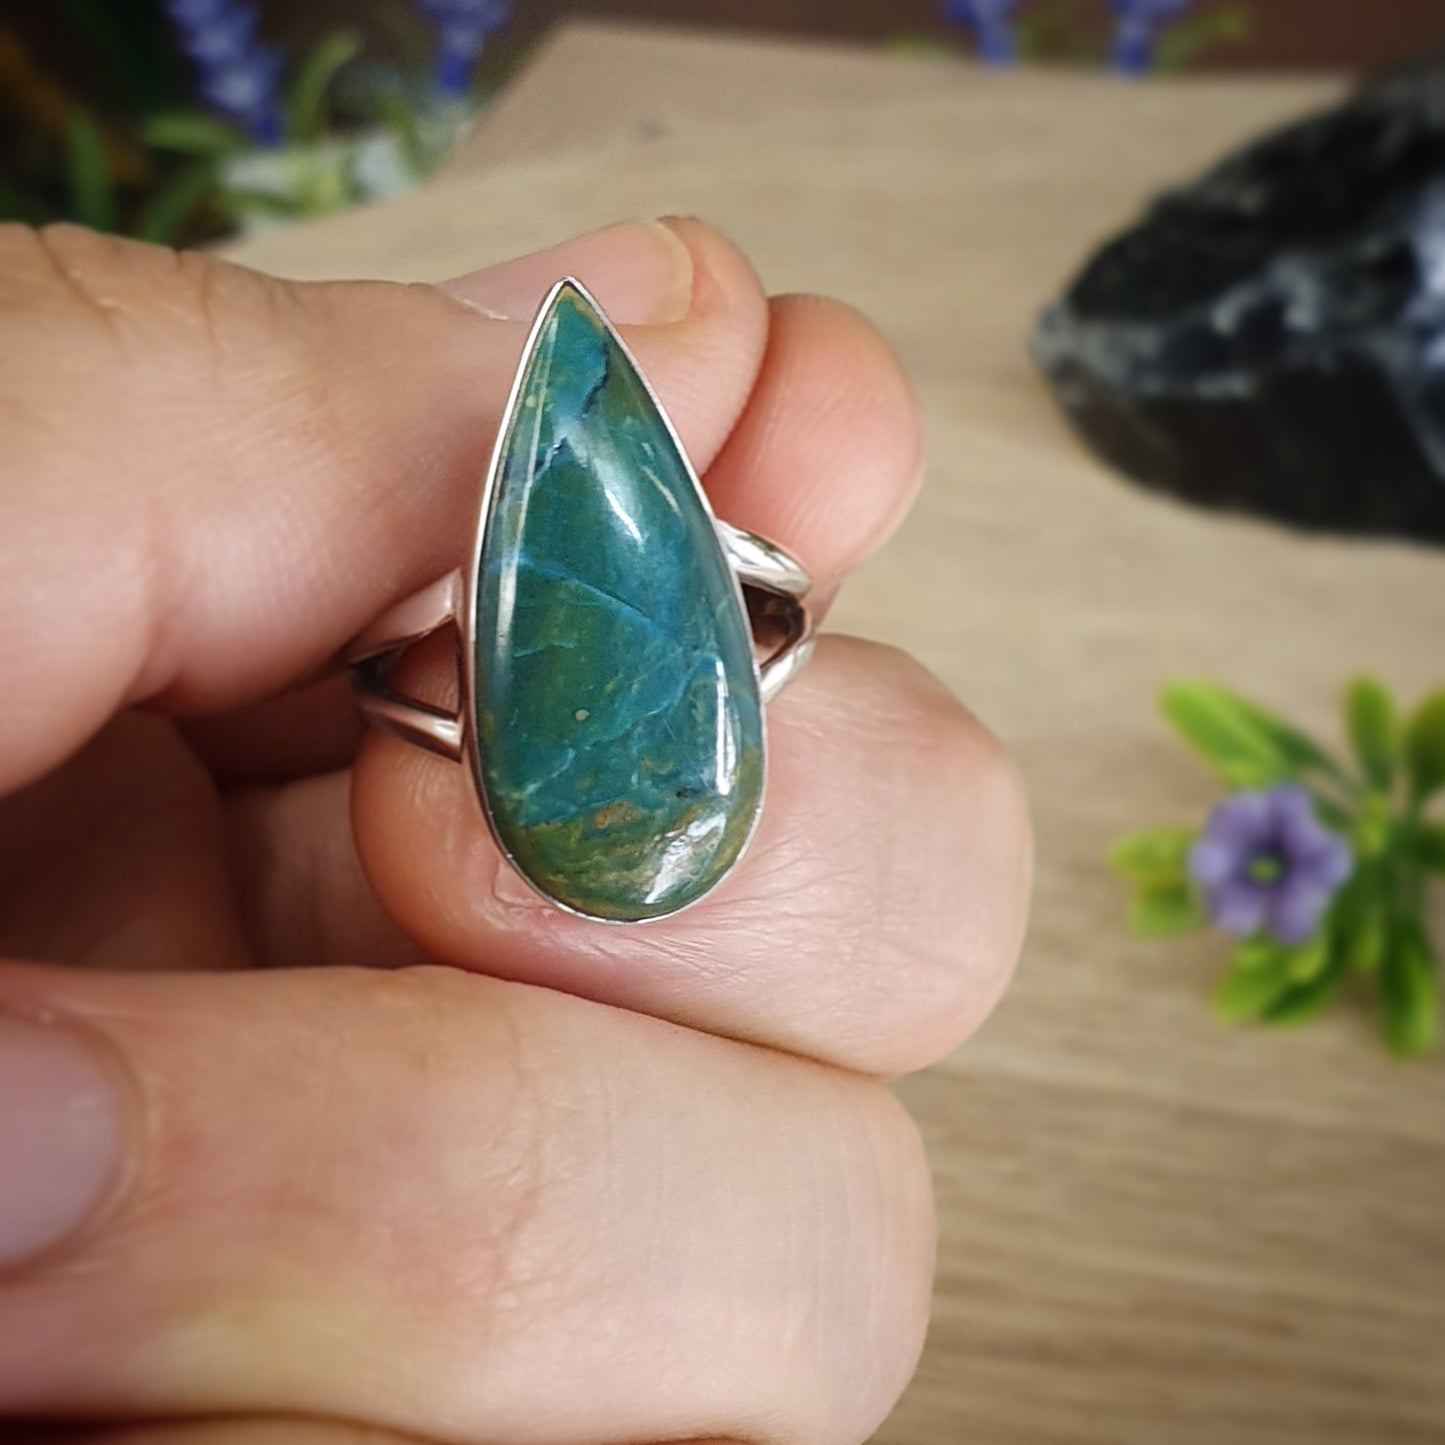 Chrysocolla Ring - Size 6.5 - ON SALE